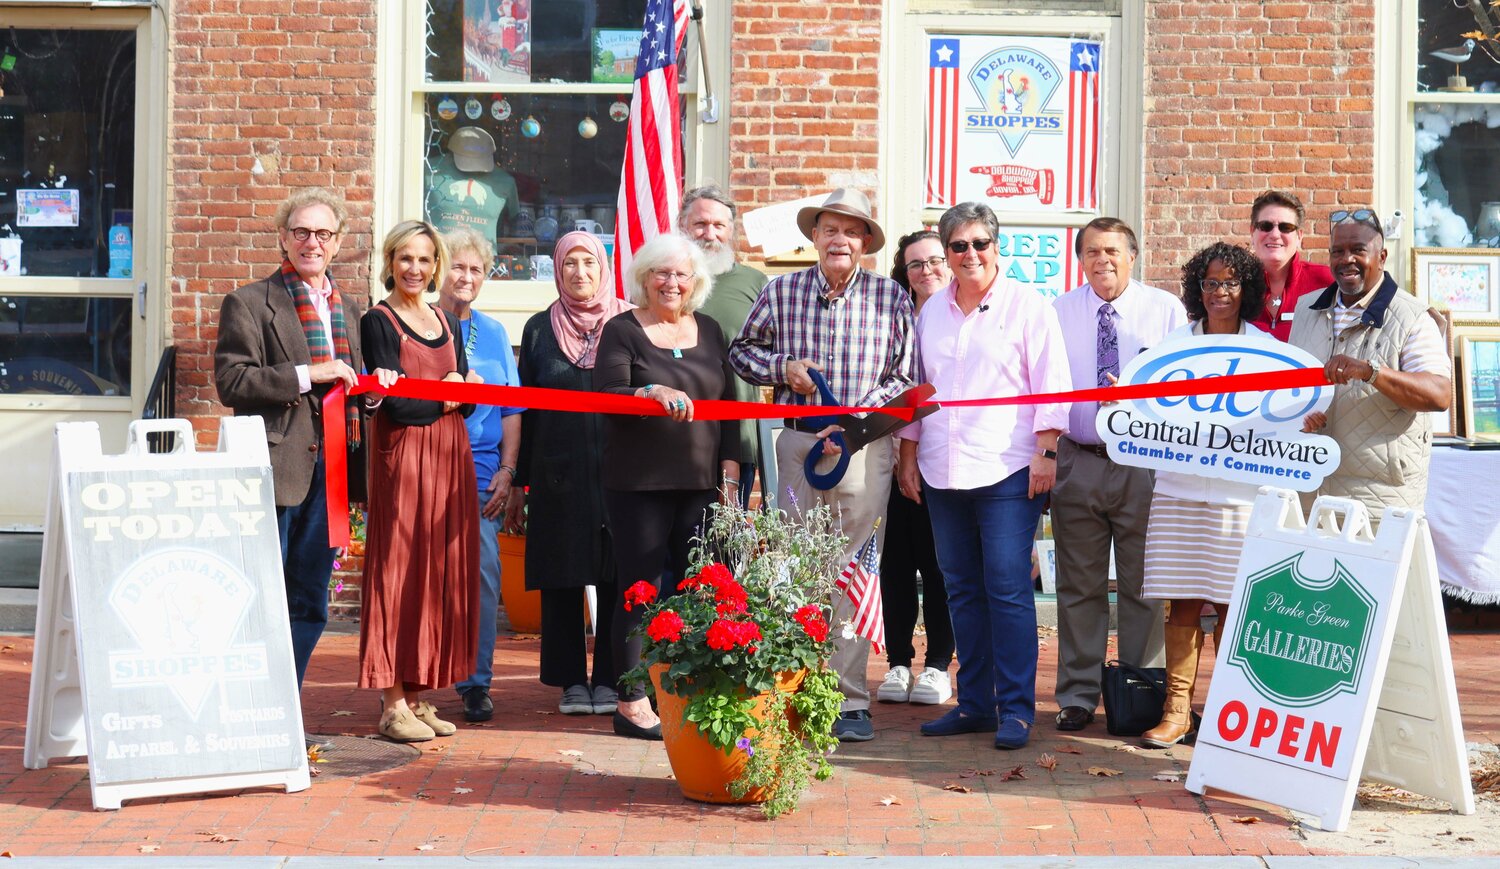 Central Delaware Chamber of Commerce members and friends joined The Delaware Shoppes manager Thomas Smith to celebrate the 10-year anniversary.